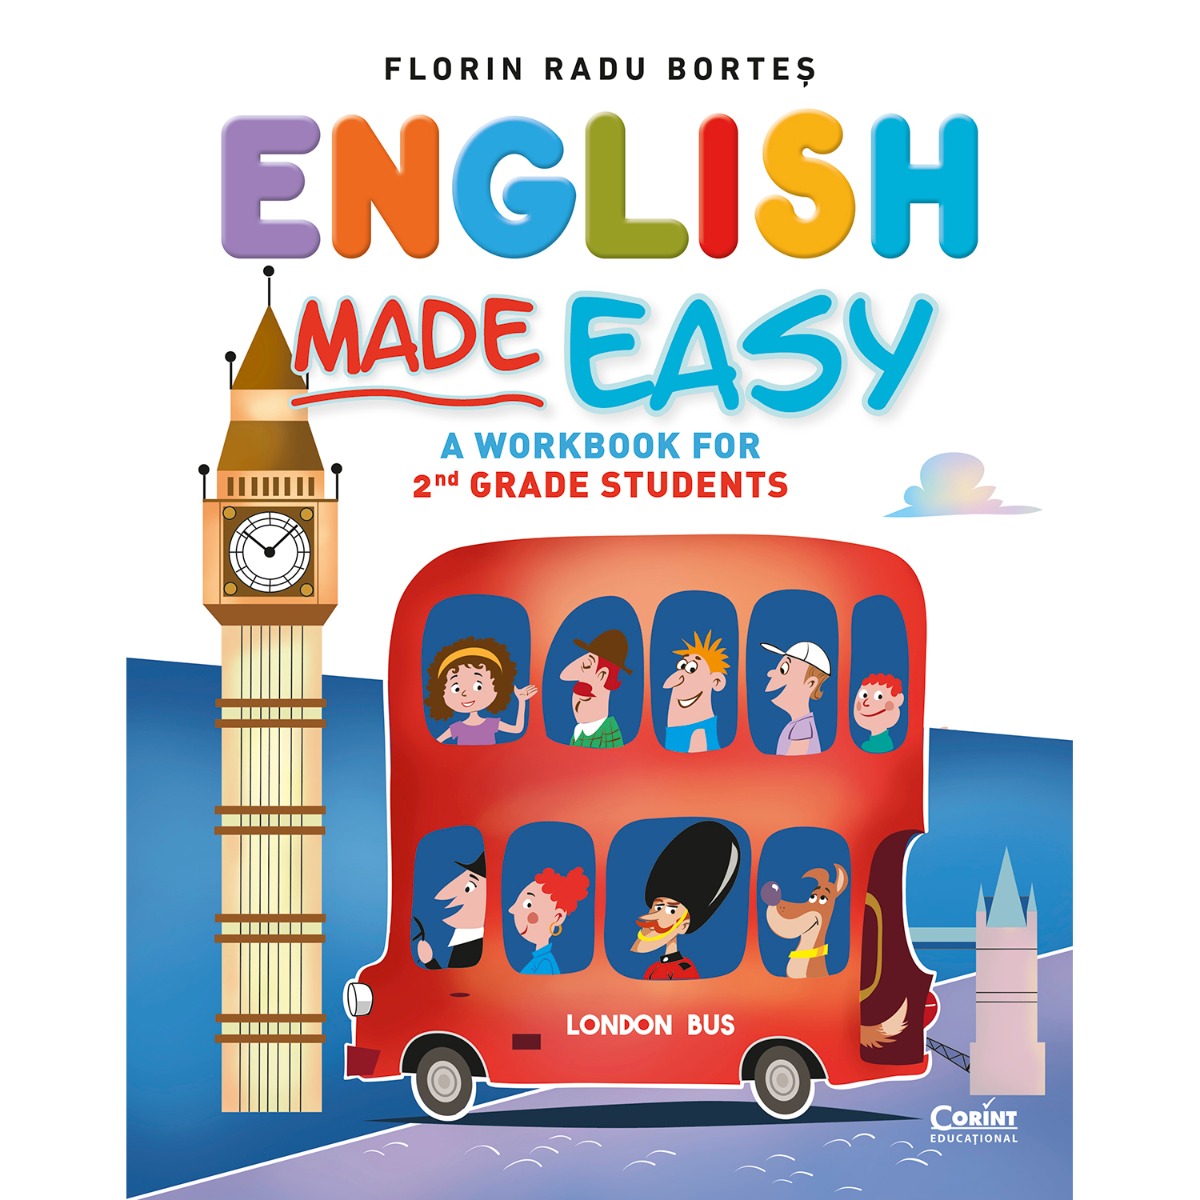 English made easy, A workbook for 2nd grade students